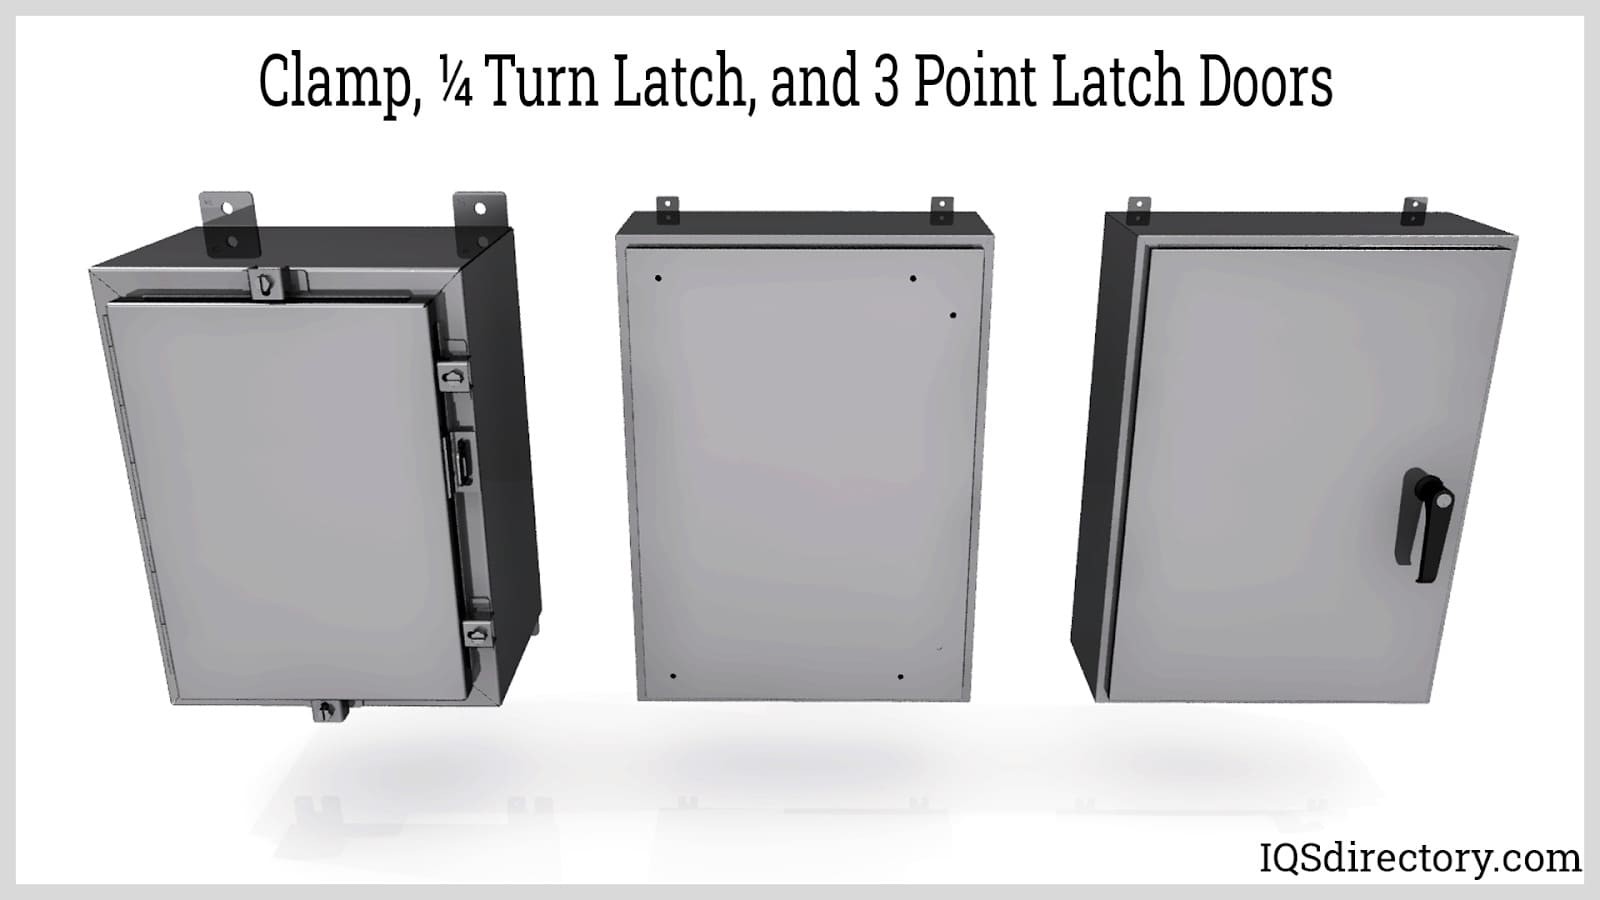 Clamp, ¼ Turn Latch, and 3 Point Latch Doors